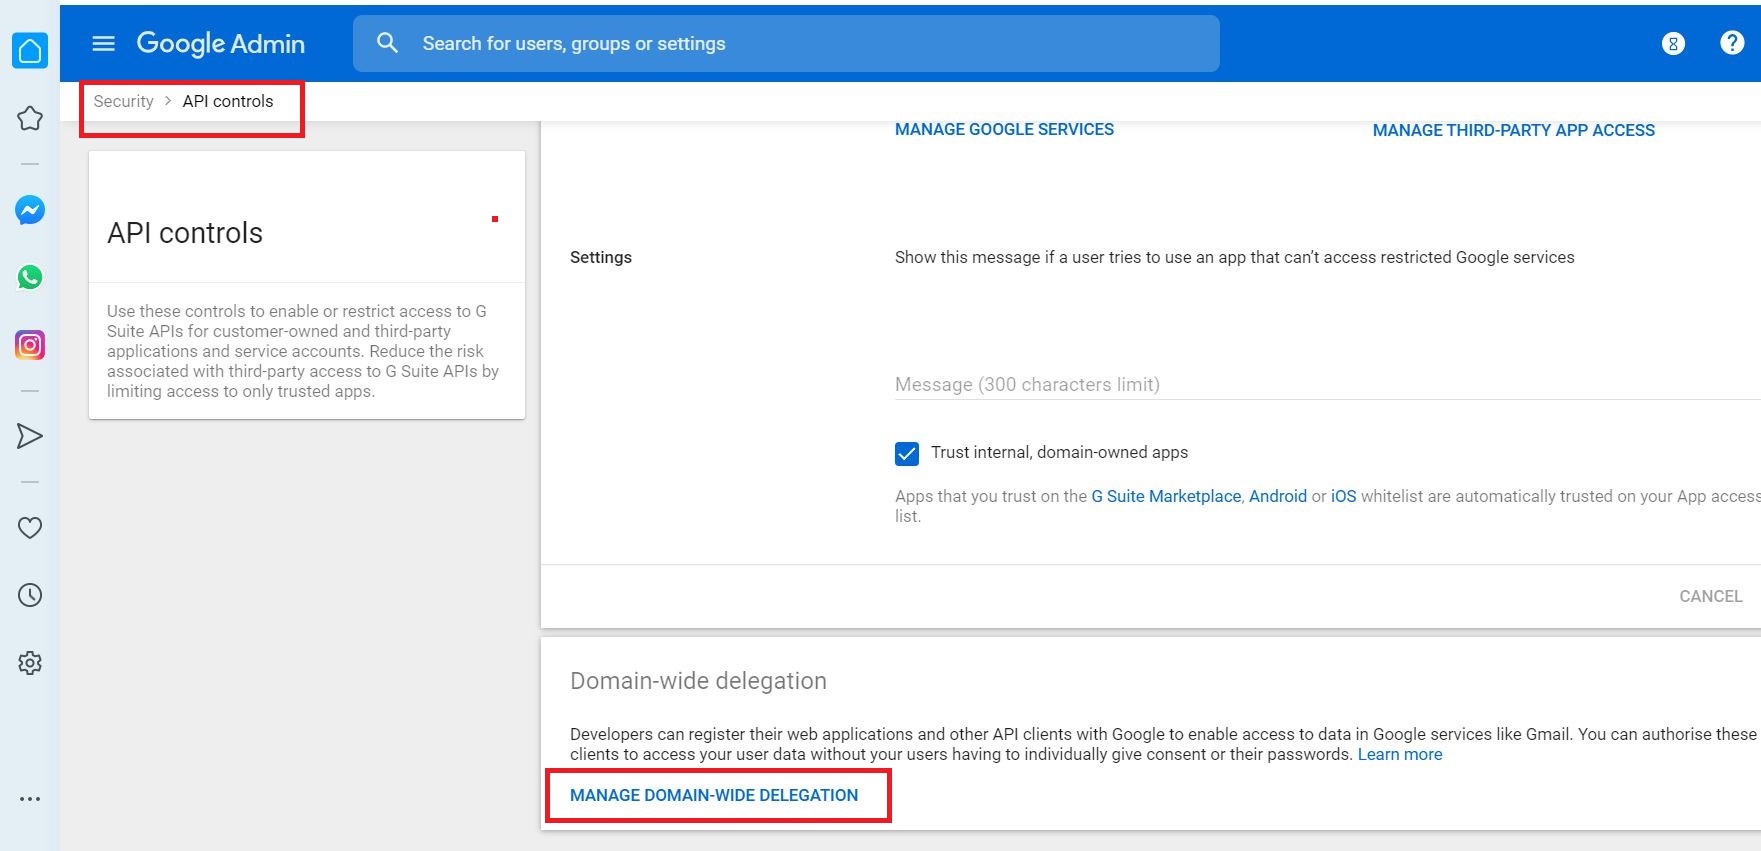 Grant access to service account 3 - manage domain wide delegations